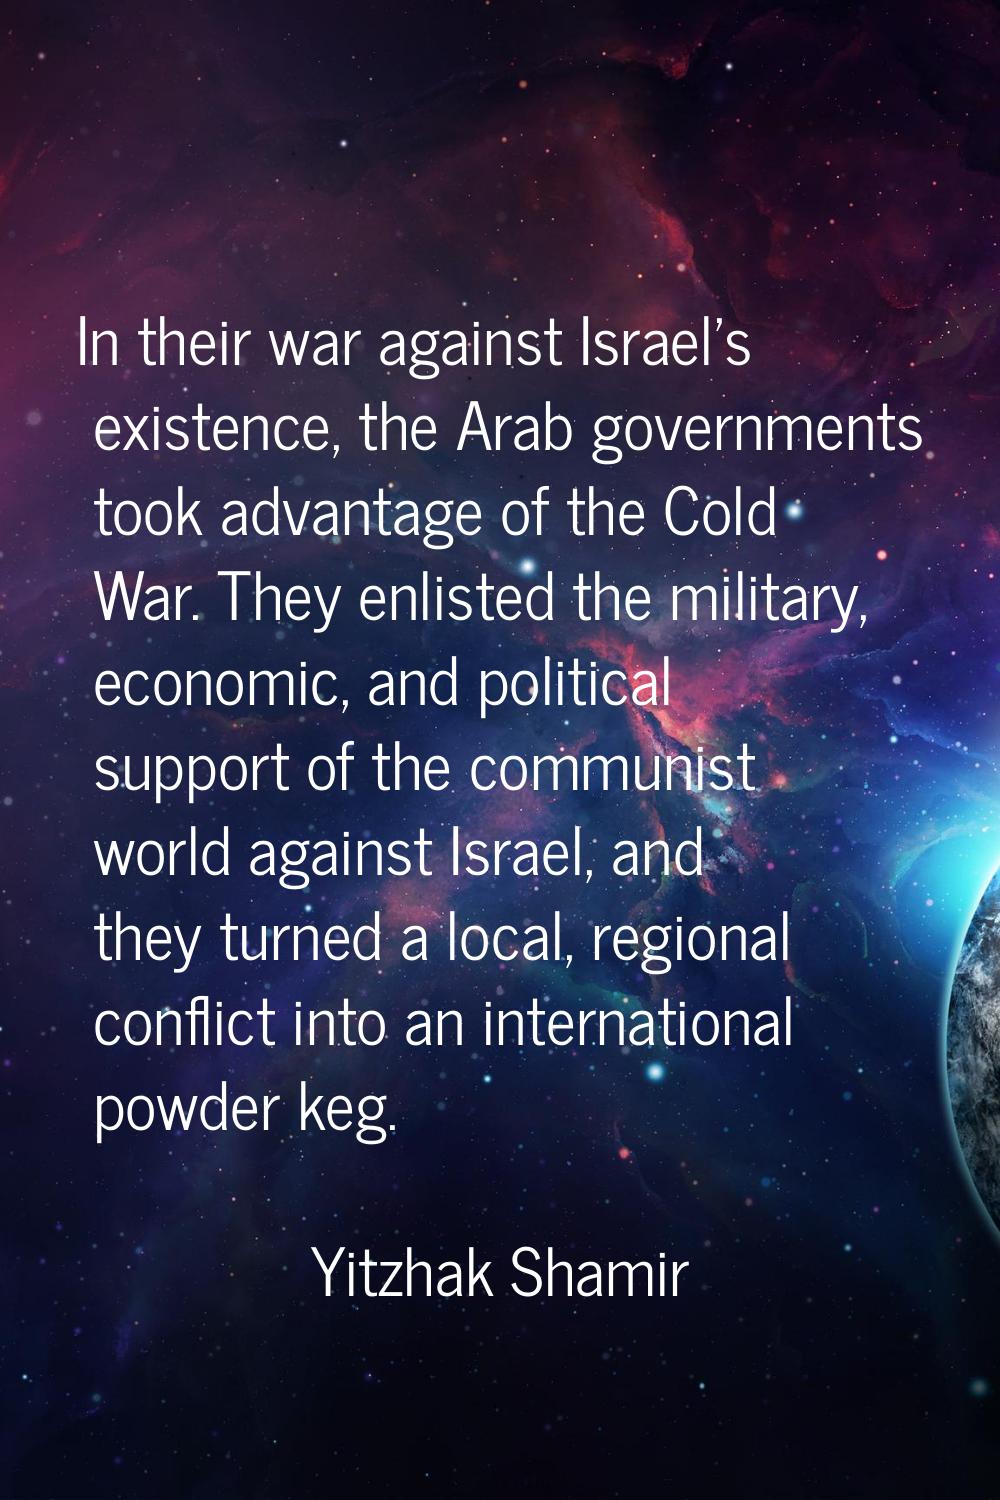 In their war against Israel's existence, the Arab governments took advantage of the Cold War. They 